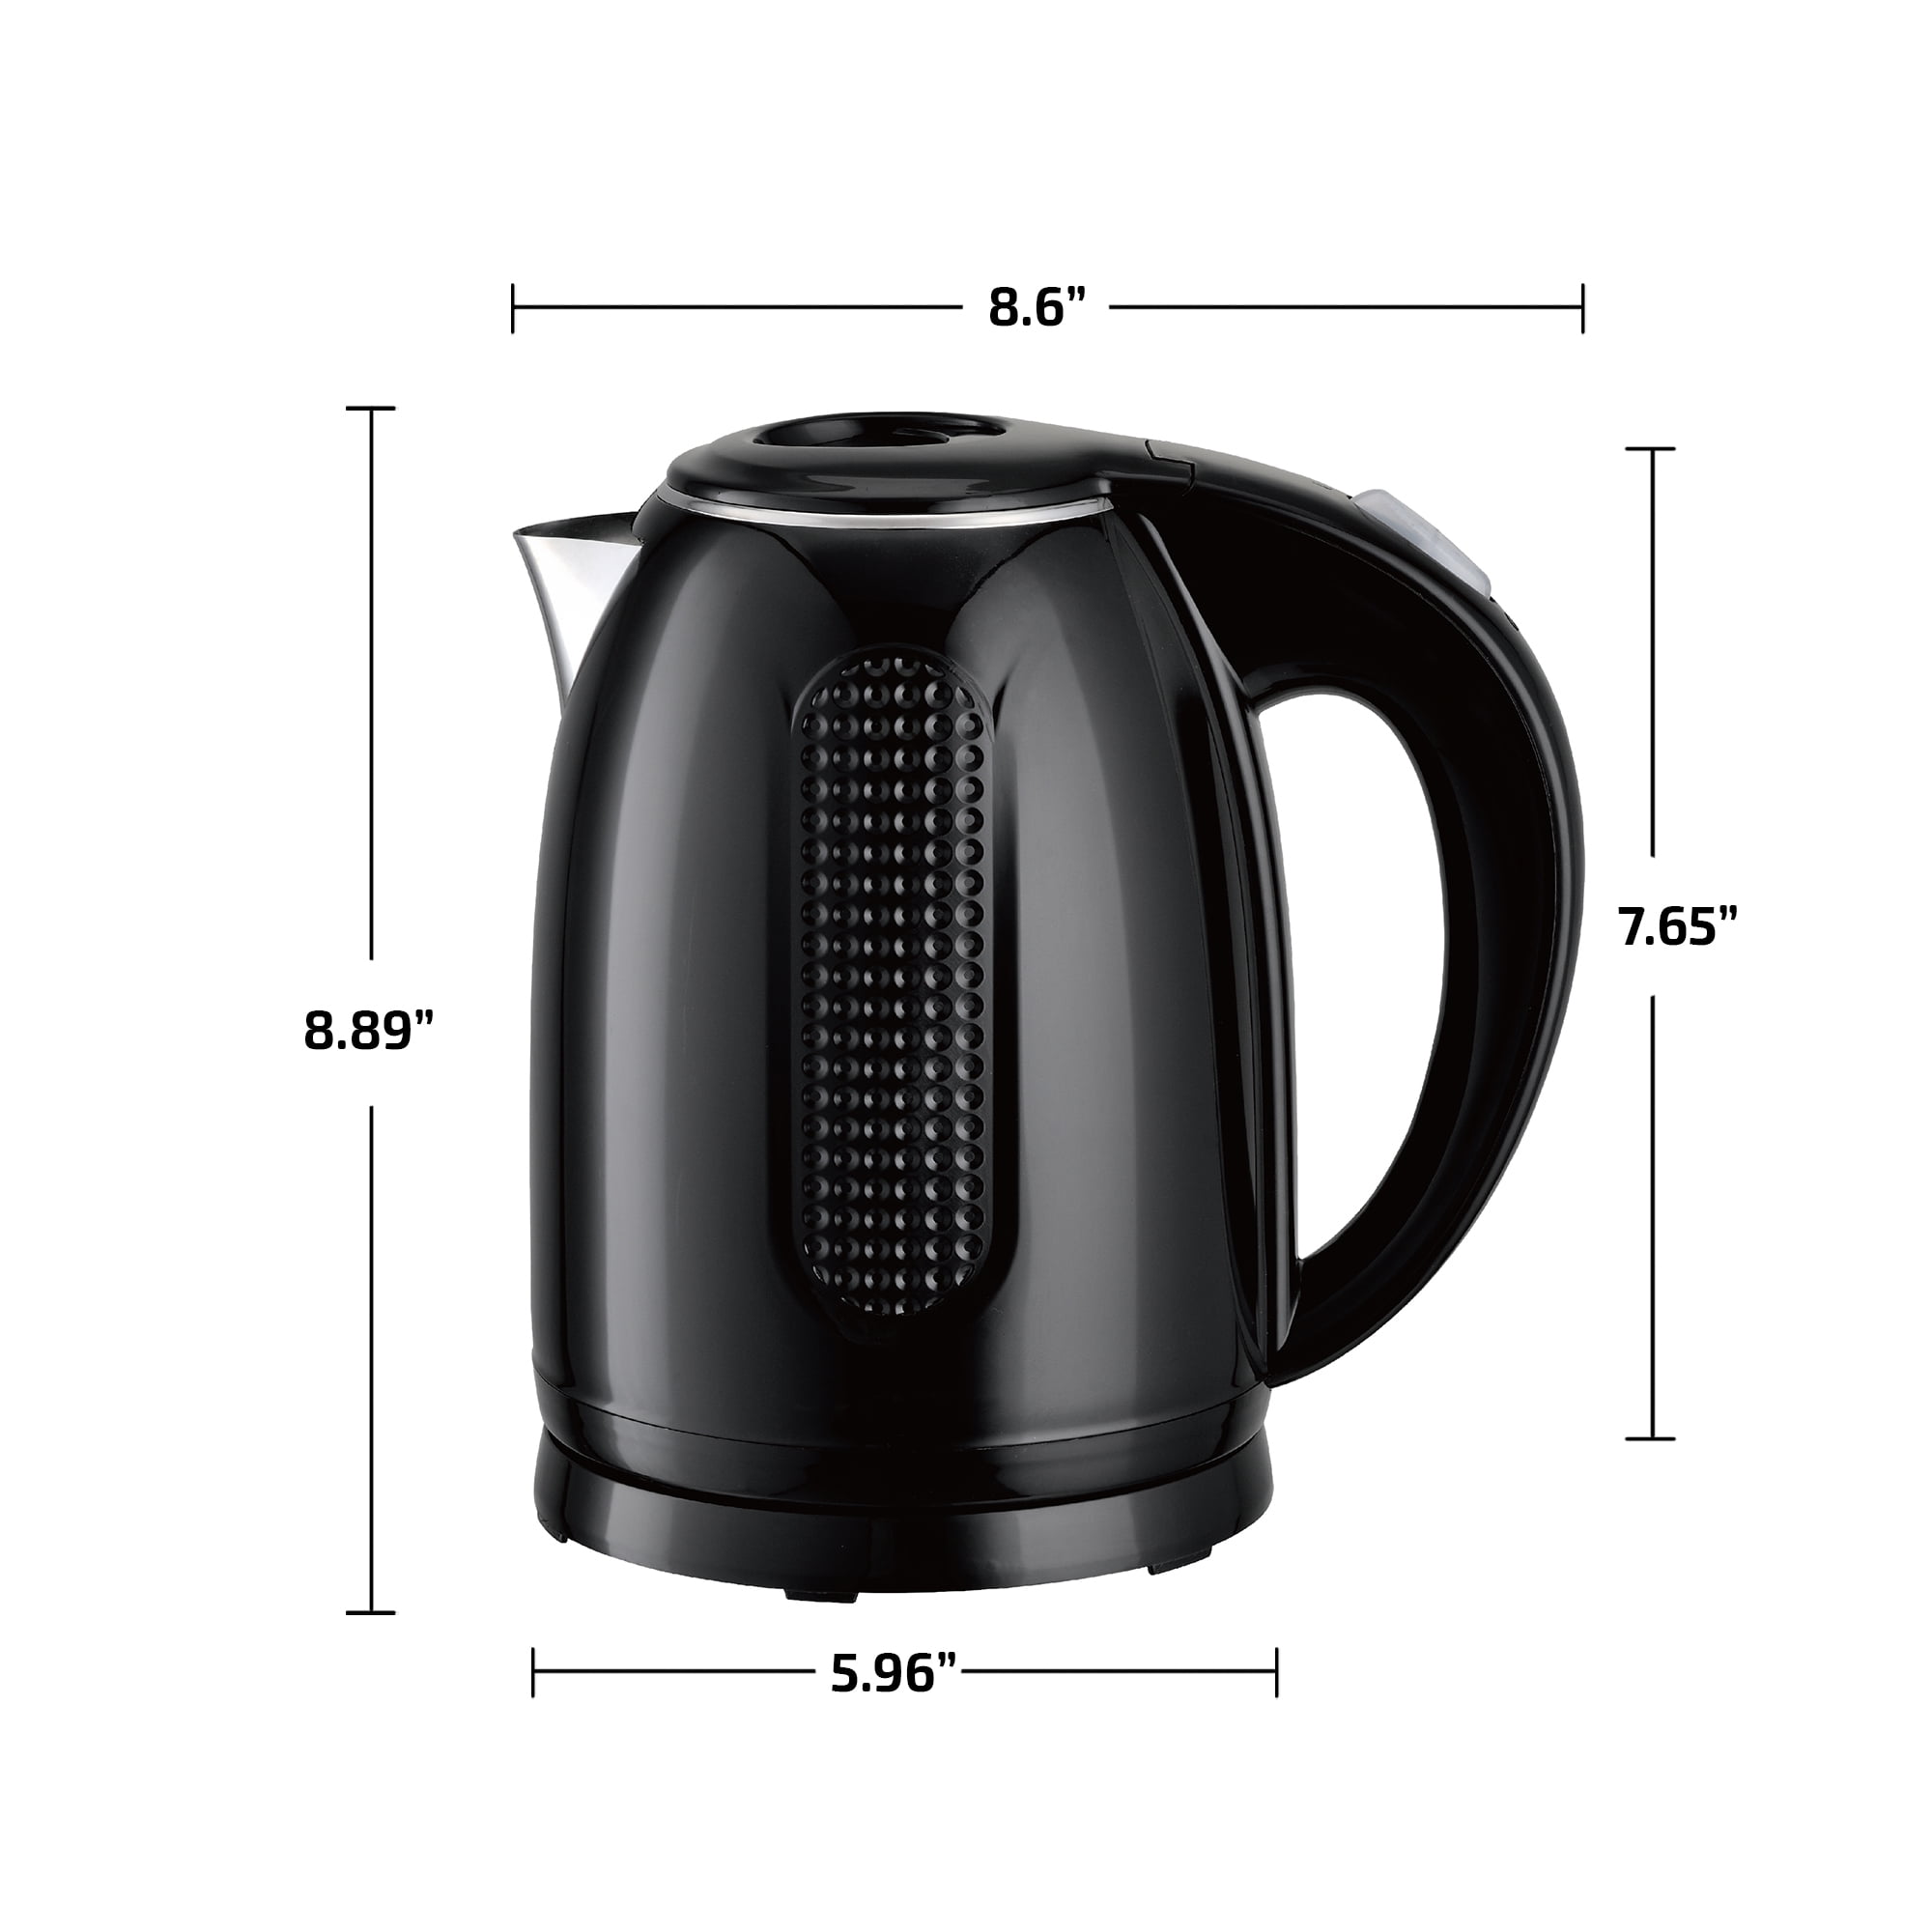 OVENTE Portable Electric Kettle Stainless Steel Instant Hot Water